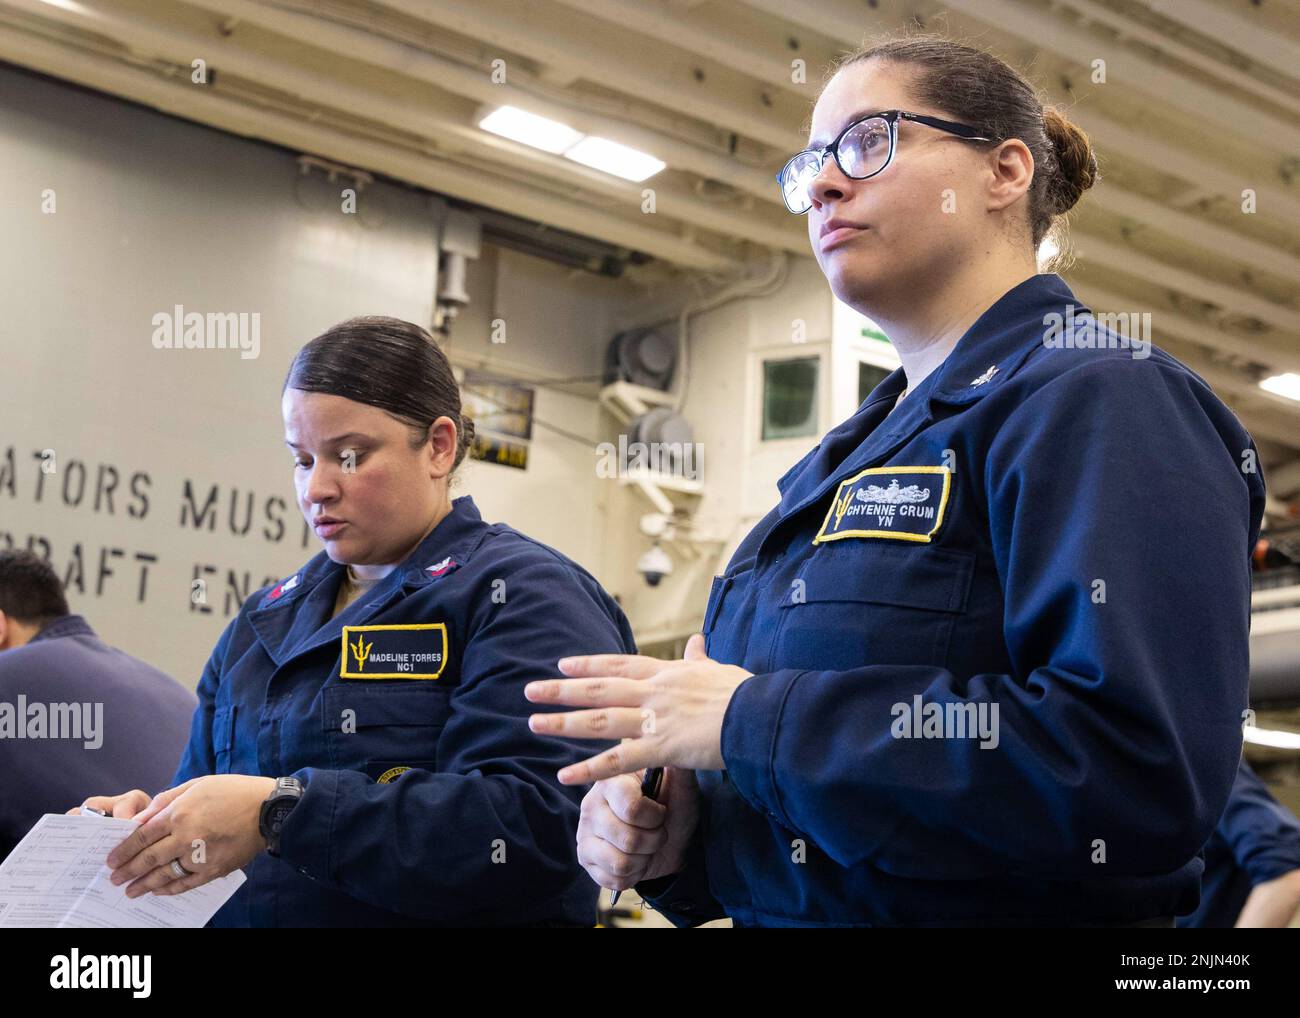 220810-N-TT639-1174 PHILIPPINE SEA (Aug. 10, 2022) – Navy Counselor 1st Class Madeline Torres, from Perth Amboy, New Jersey, left, and Yeoman 2nd Class Chyenne Crum, from Tallahassee, Florida, issue badges during non-combatant evacuation operation drill in the hangar bay aboard amphibious assault carrier USS Tripoli (LHA 7), Aug. 10, 2022. Tripoli is operating in the U.S. 7th Fleet area of operations to enhance interoperability with allies and partners and serve as a ready response force to defend peace and maintain stability in the Indo-Pacific region. Stock Photo